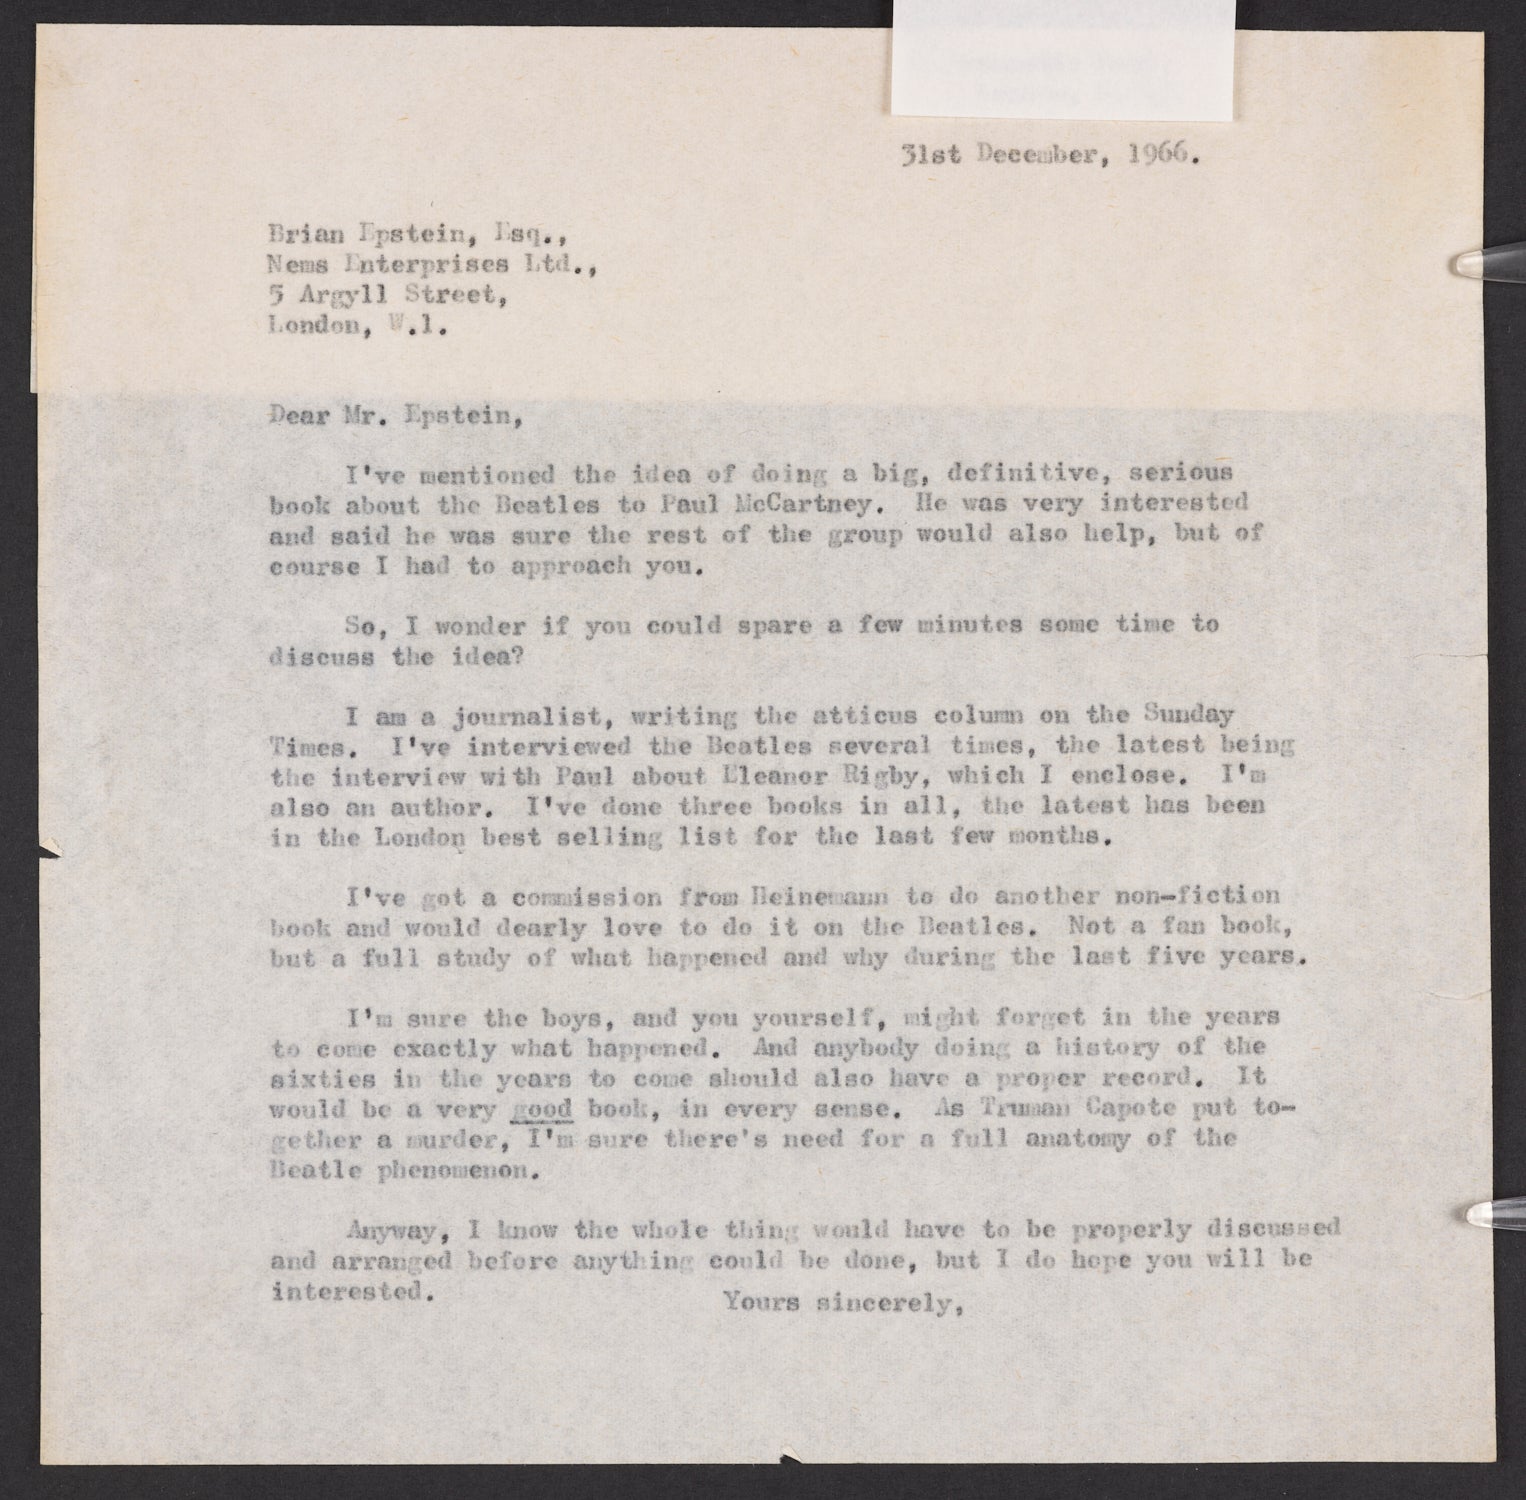 A letter to Brian Epstein suggesting the idea of an authorised biography of the Beatles (Hunter Davies/British Library/PA)